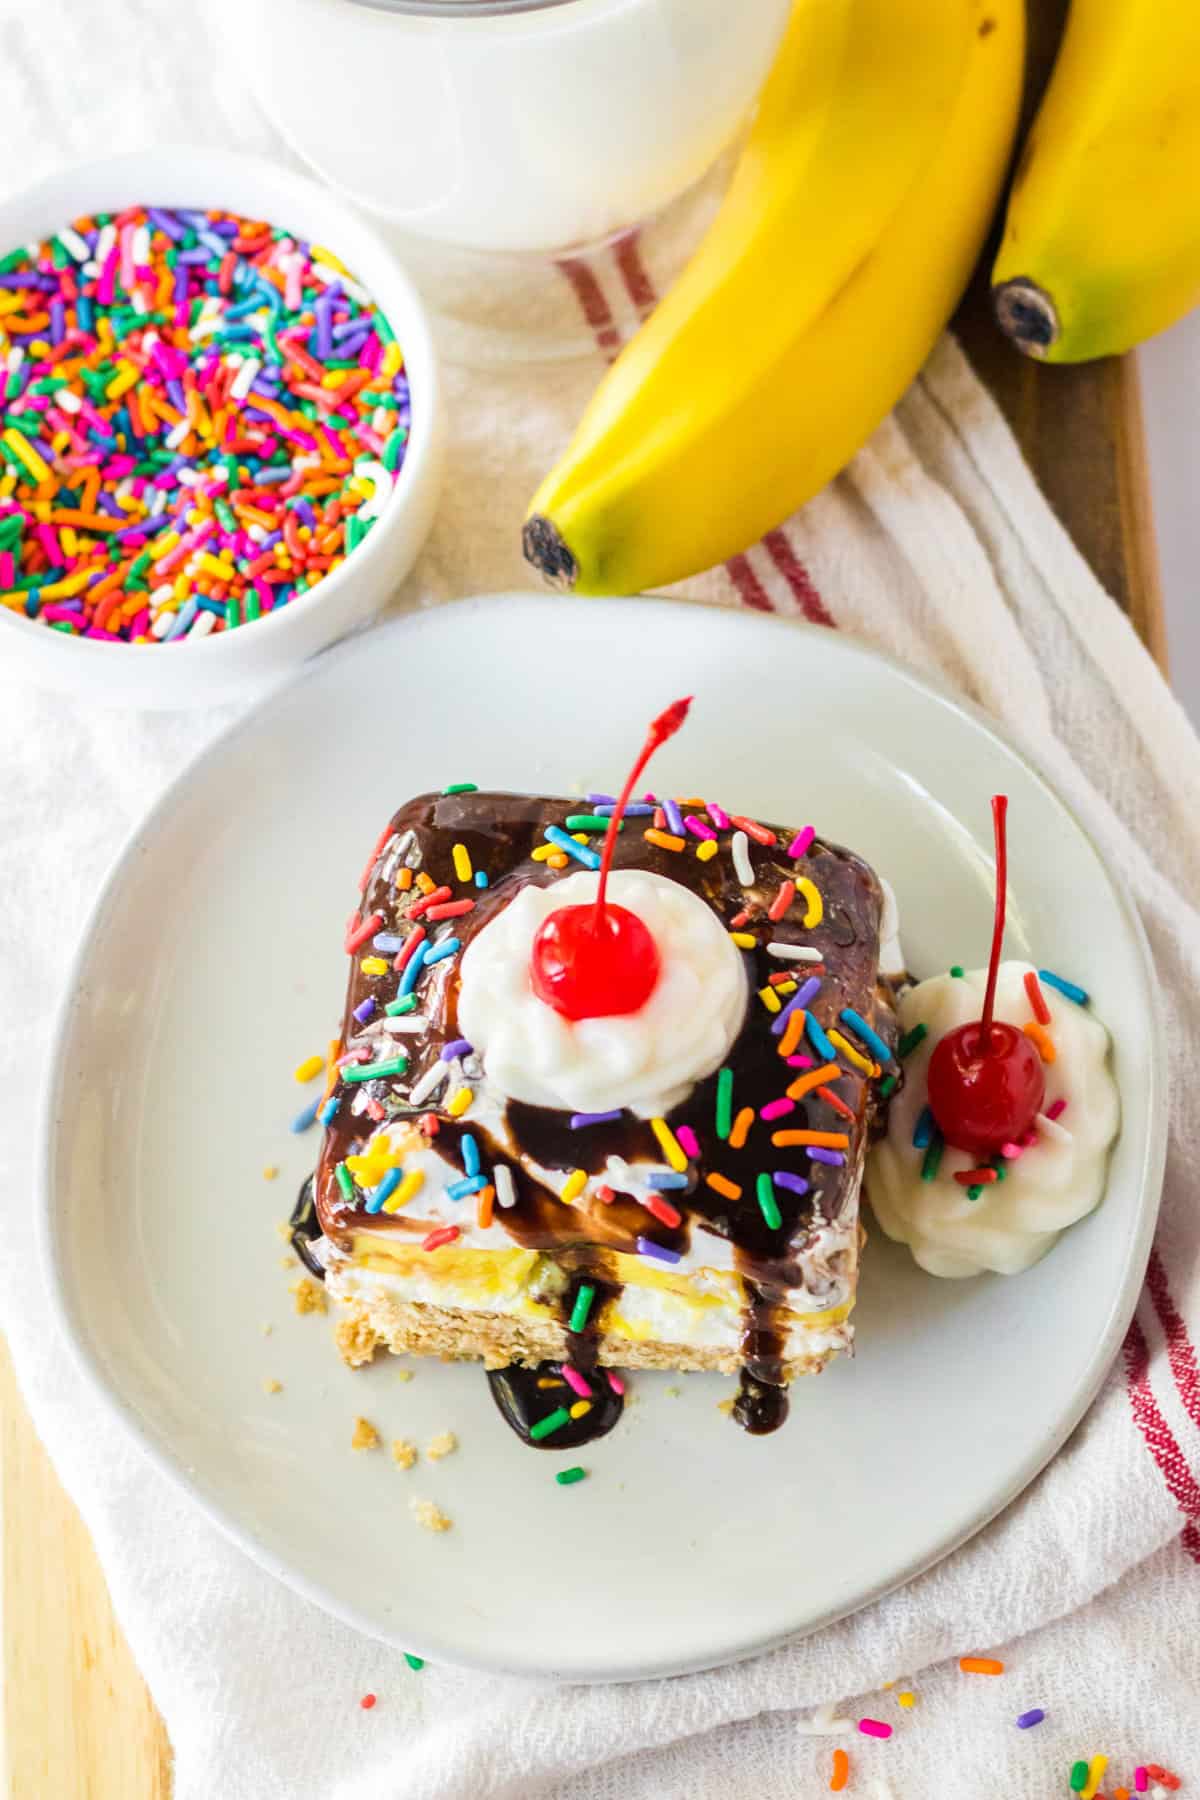 Square piece of no bake banana split cake on white plate with whipped cream and a cherry. Rainbow sprinkles and fresh bananas are next to the plate.